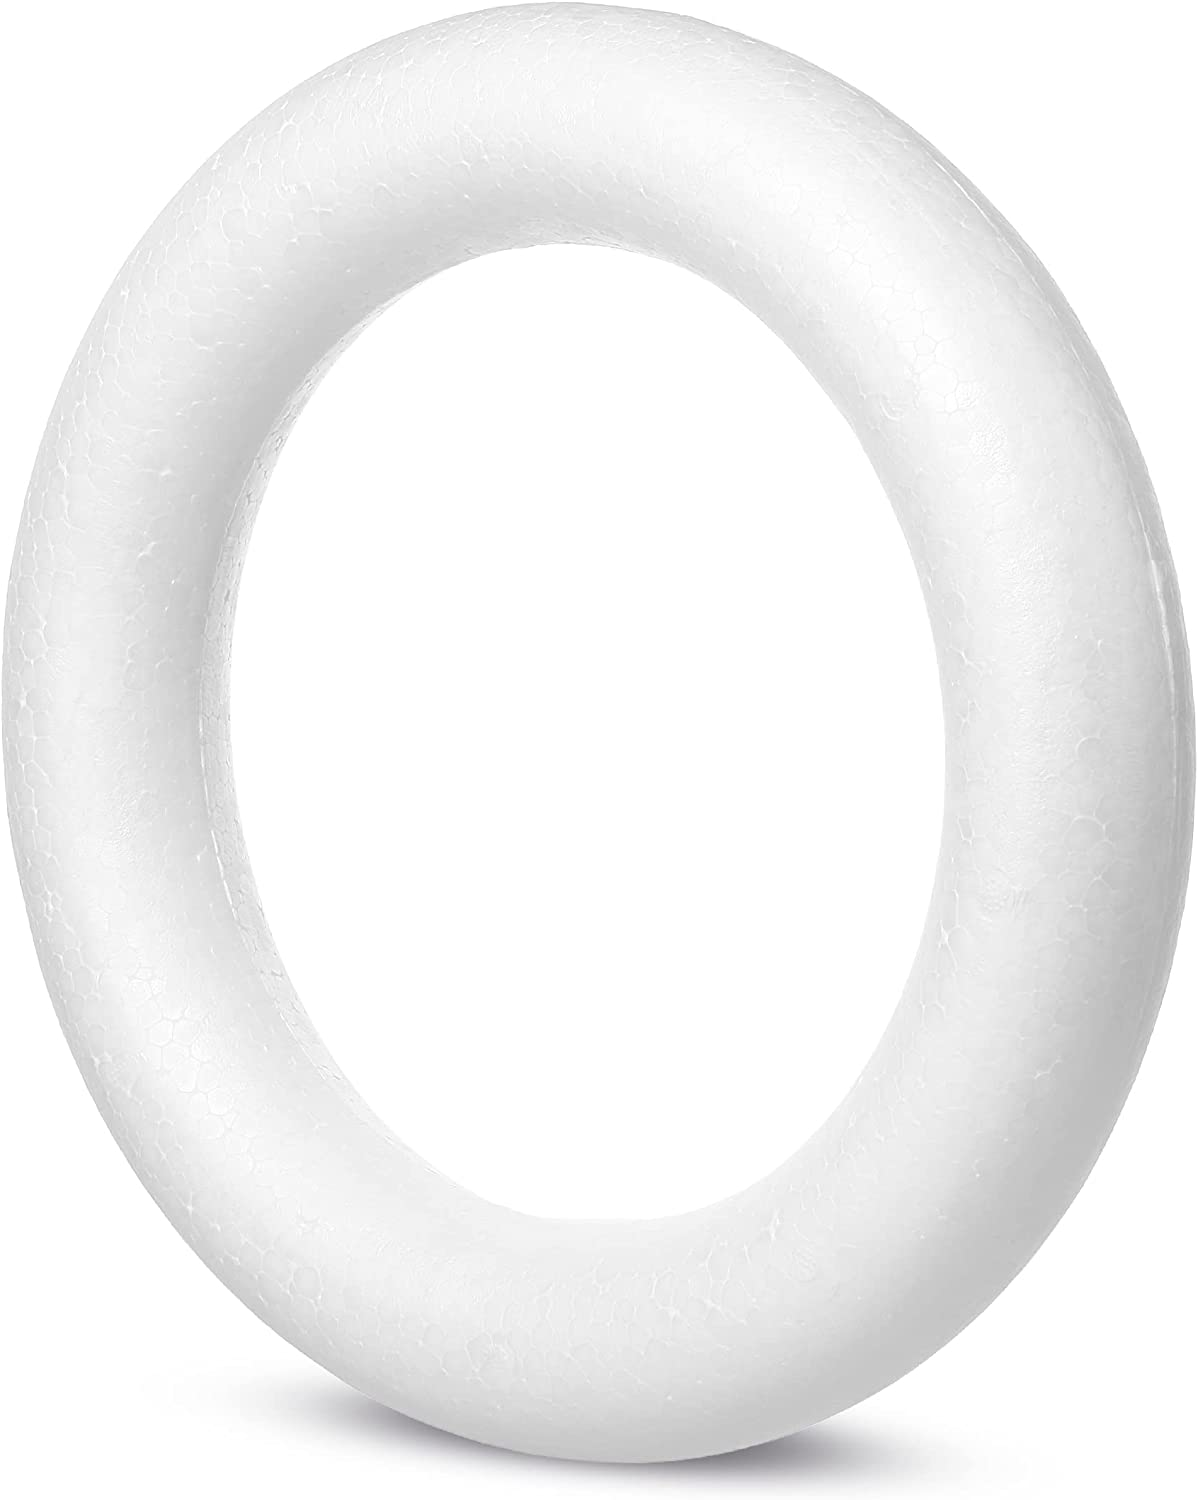 Foam Wreath Forms Craft White Polystyrene Circles Ring Round Form Crafts  Diy Arts Floral Projects Home Wedding Decor